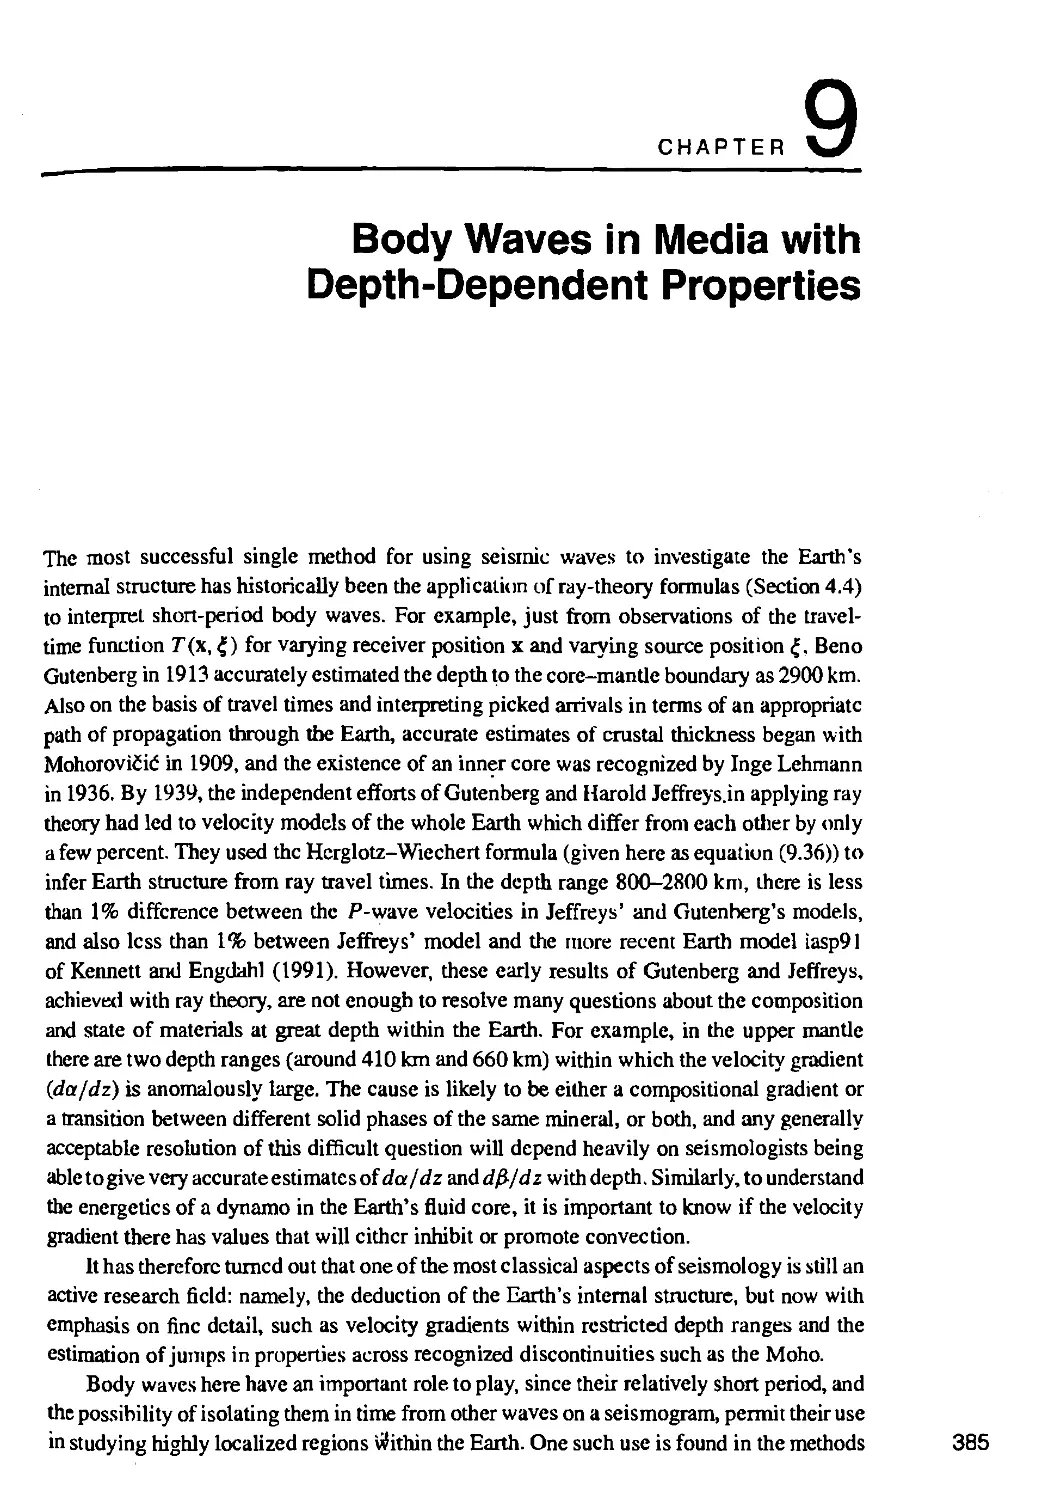 9. BODY WAVES IN MEDIA WITH DEPTH-DEPENDENT PROPERTIES